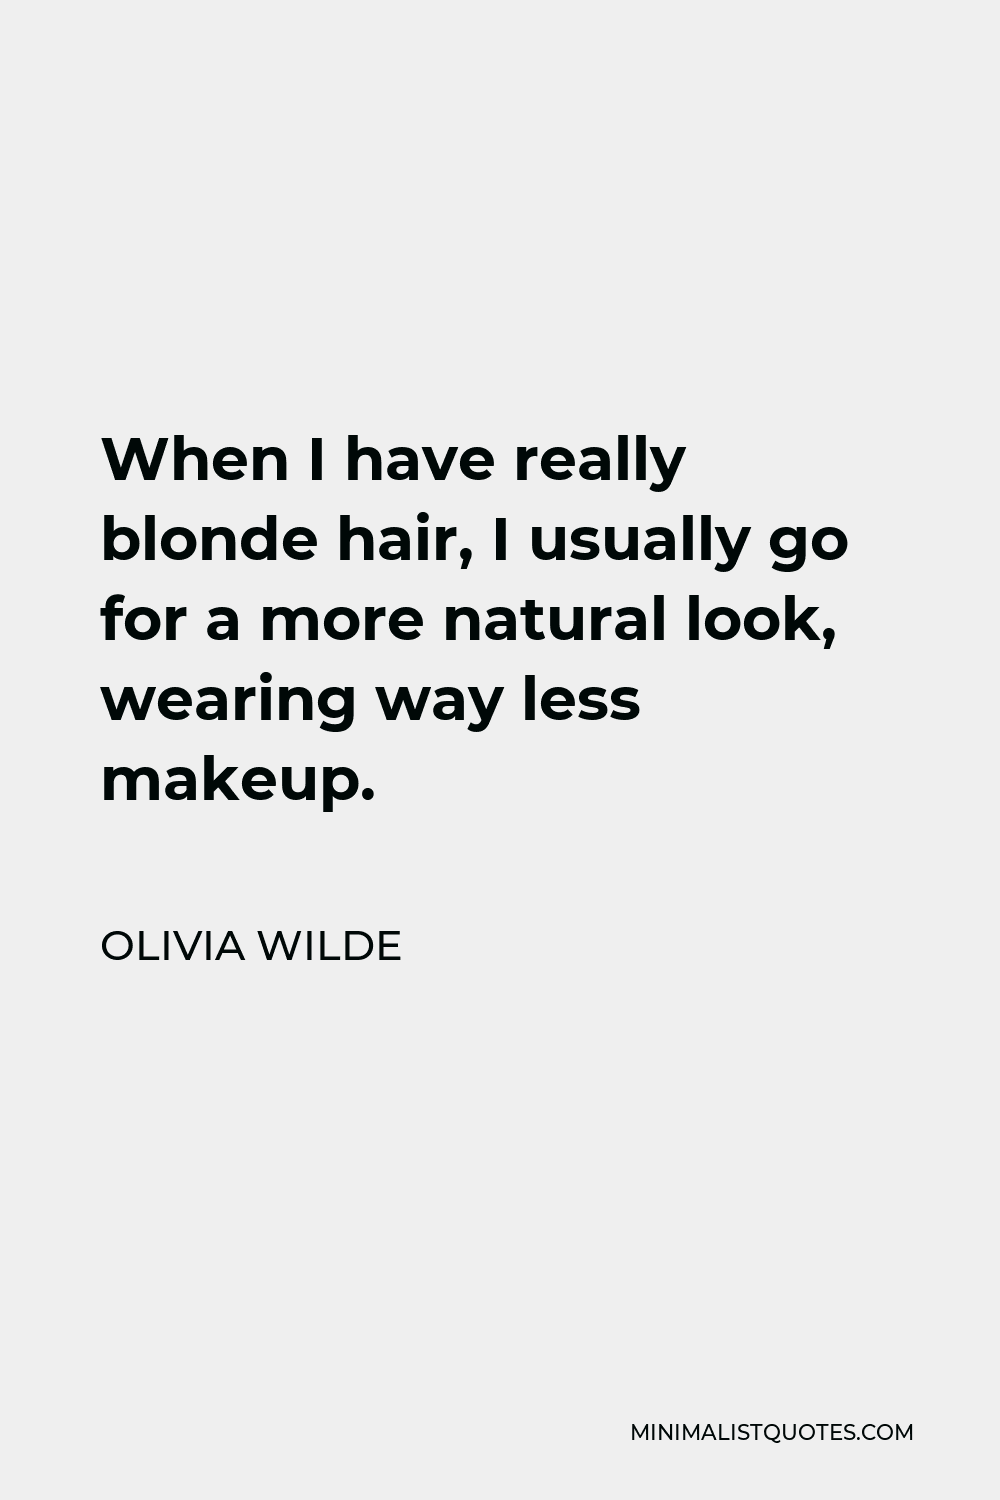 Olivia Wilde Quote - When I have really blonde hair, I usually go for a more natural look, wearing way less makeup.